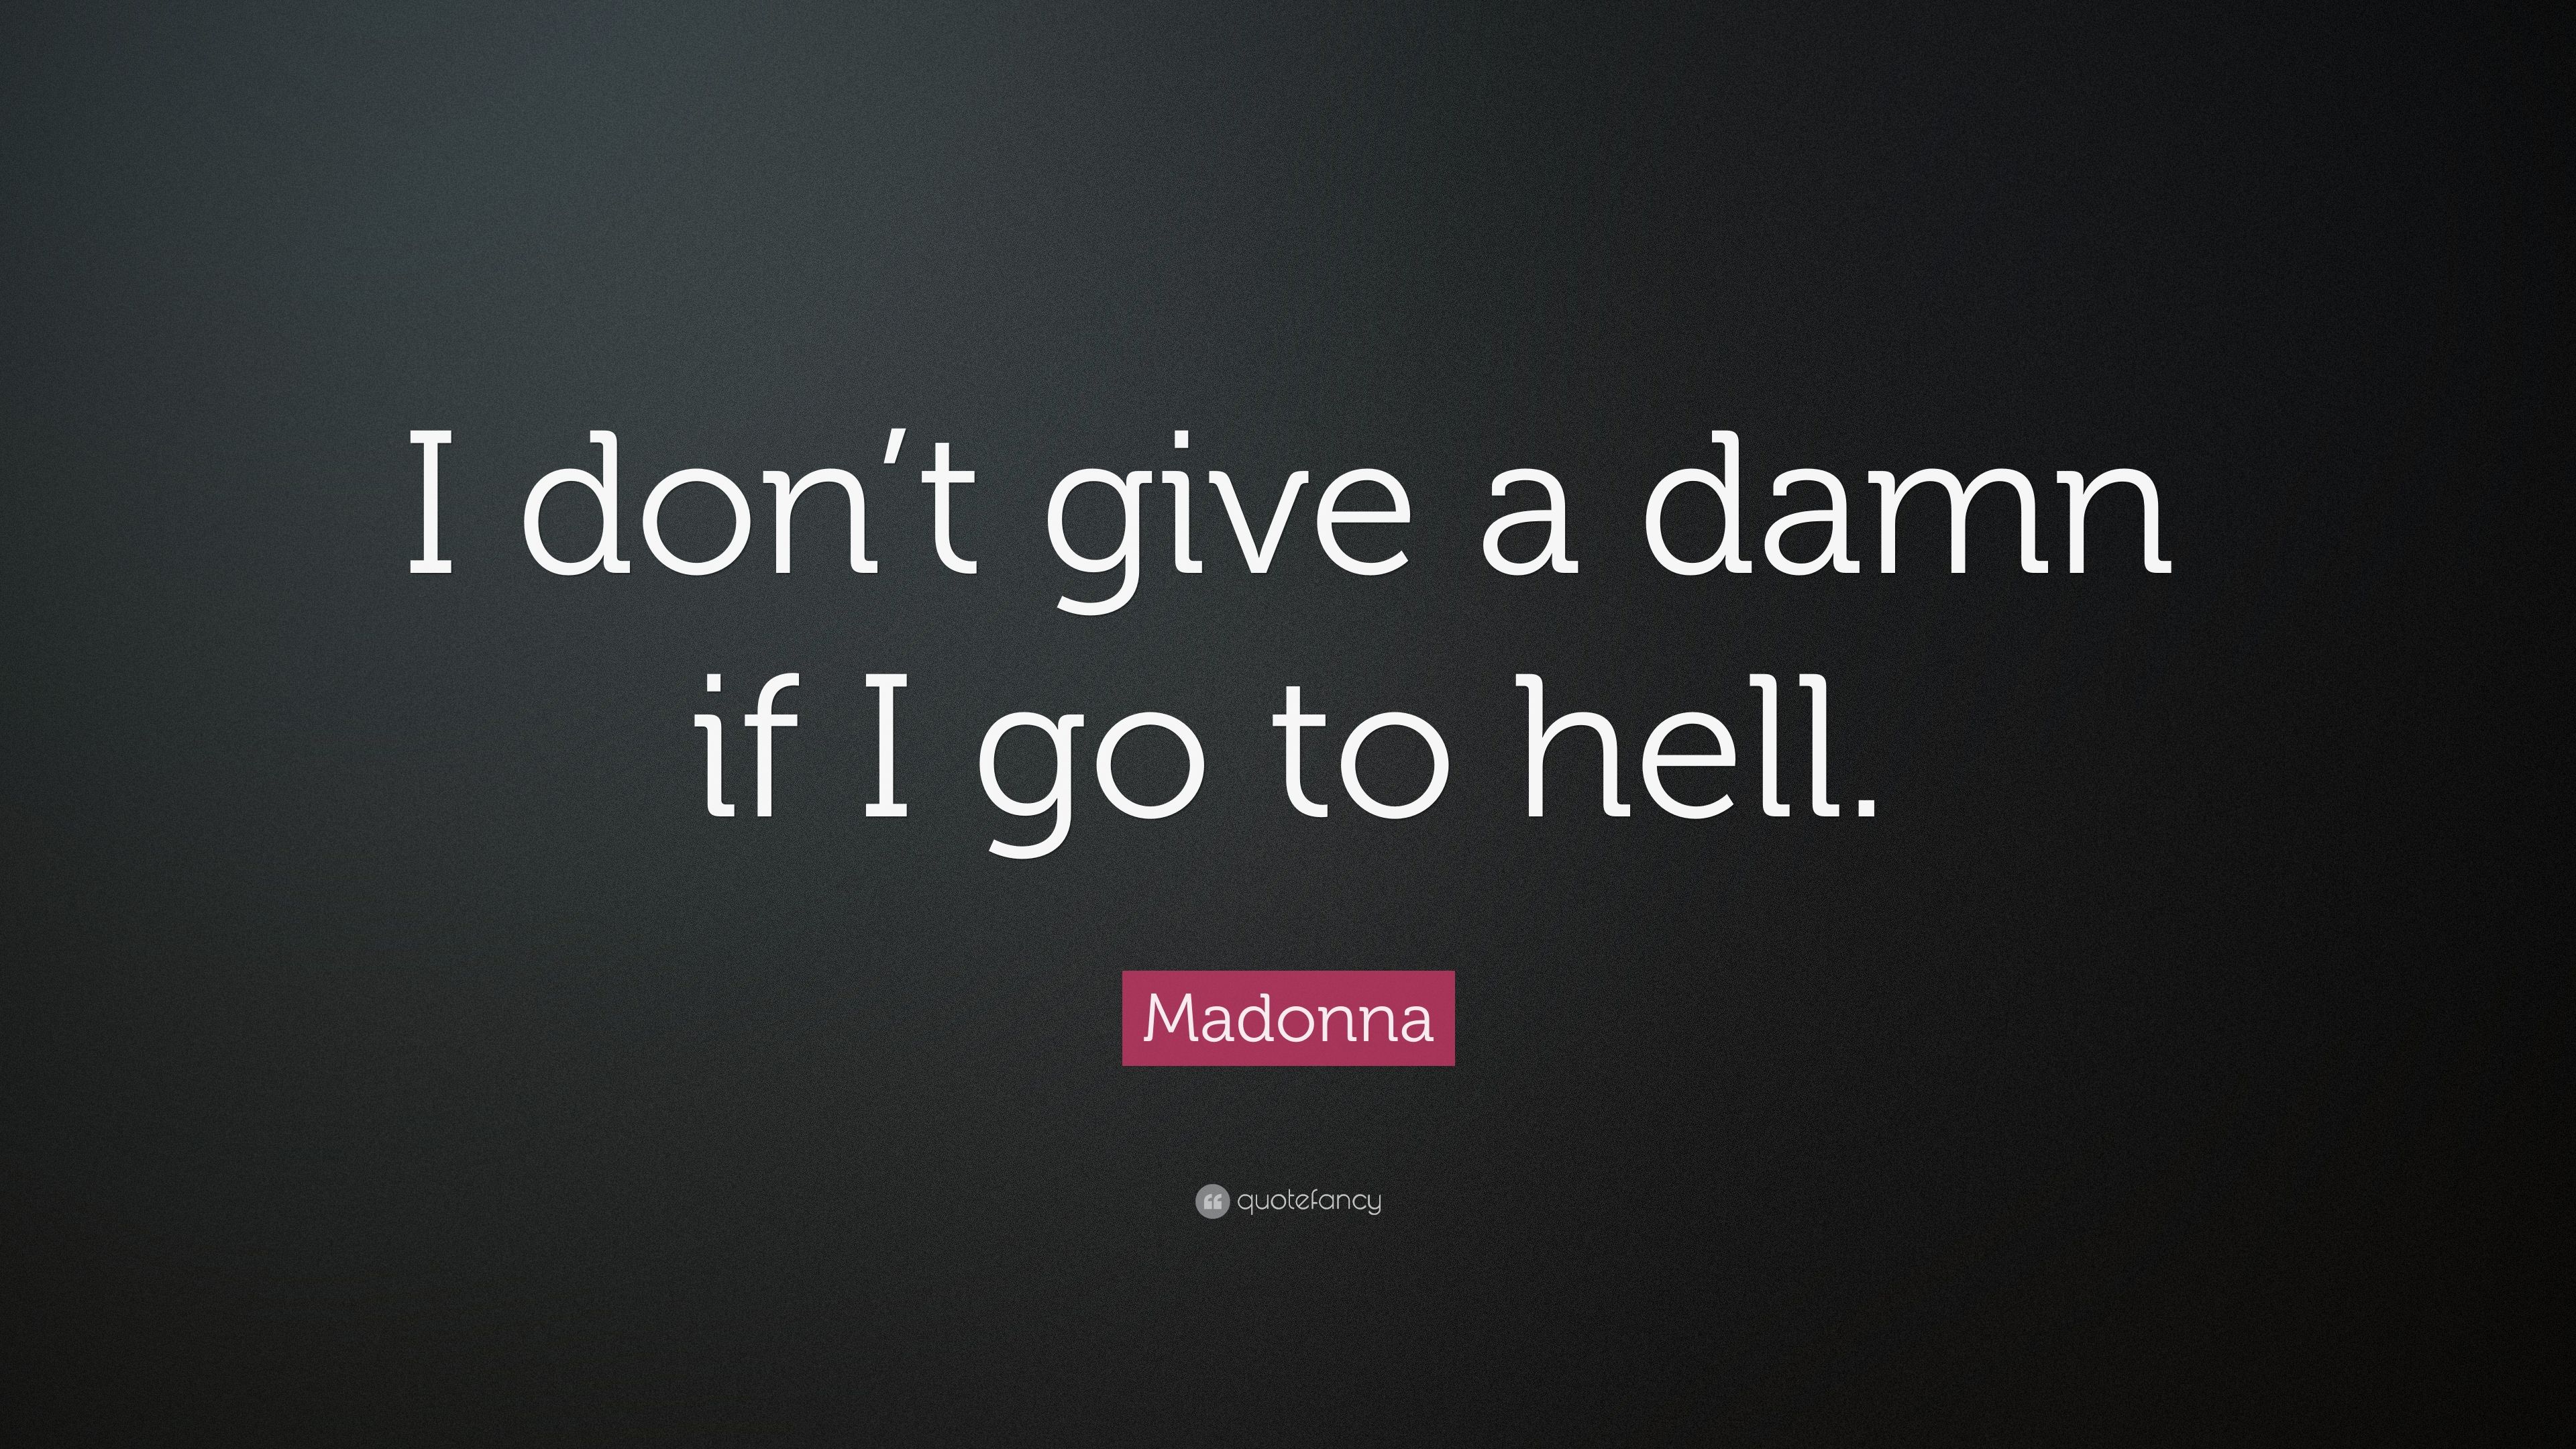 Madonna Quote: “I don't give a damn if I go to hell.” (7 wallpaper)